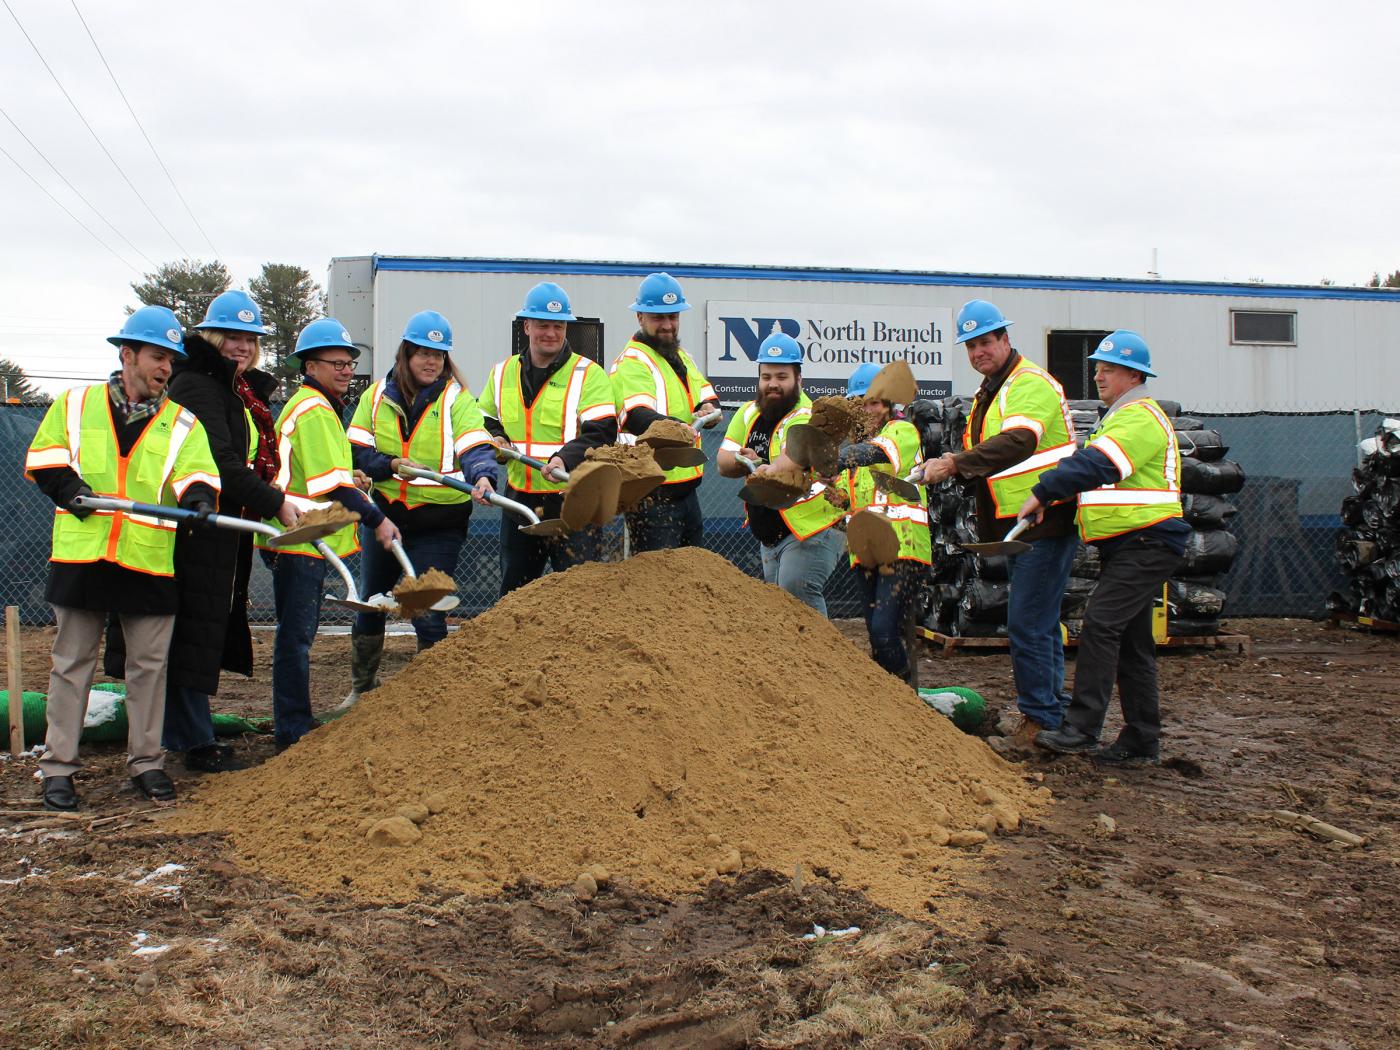 North Branch Construction Celebrates Groundbreaking at White Birch Armory in Dover, NH